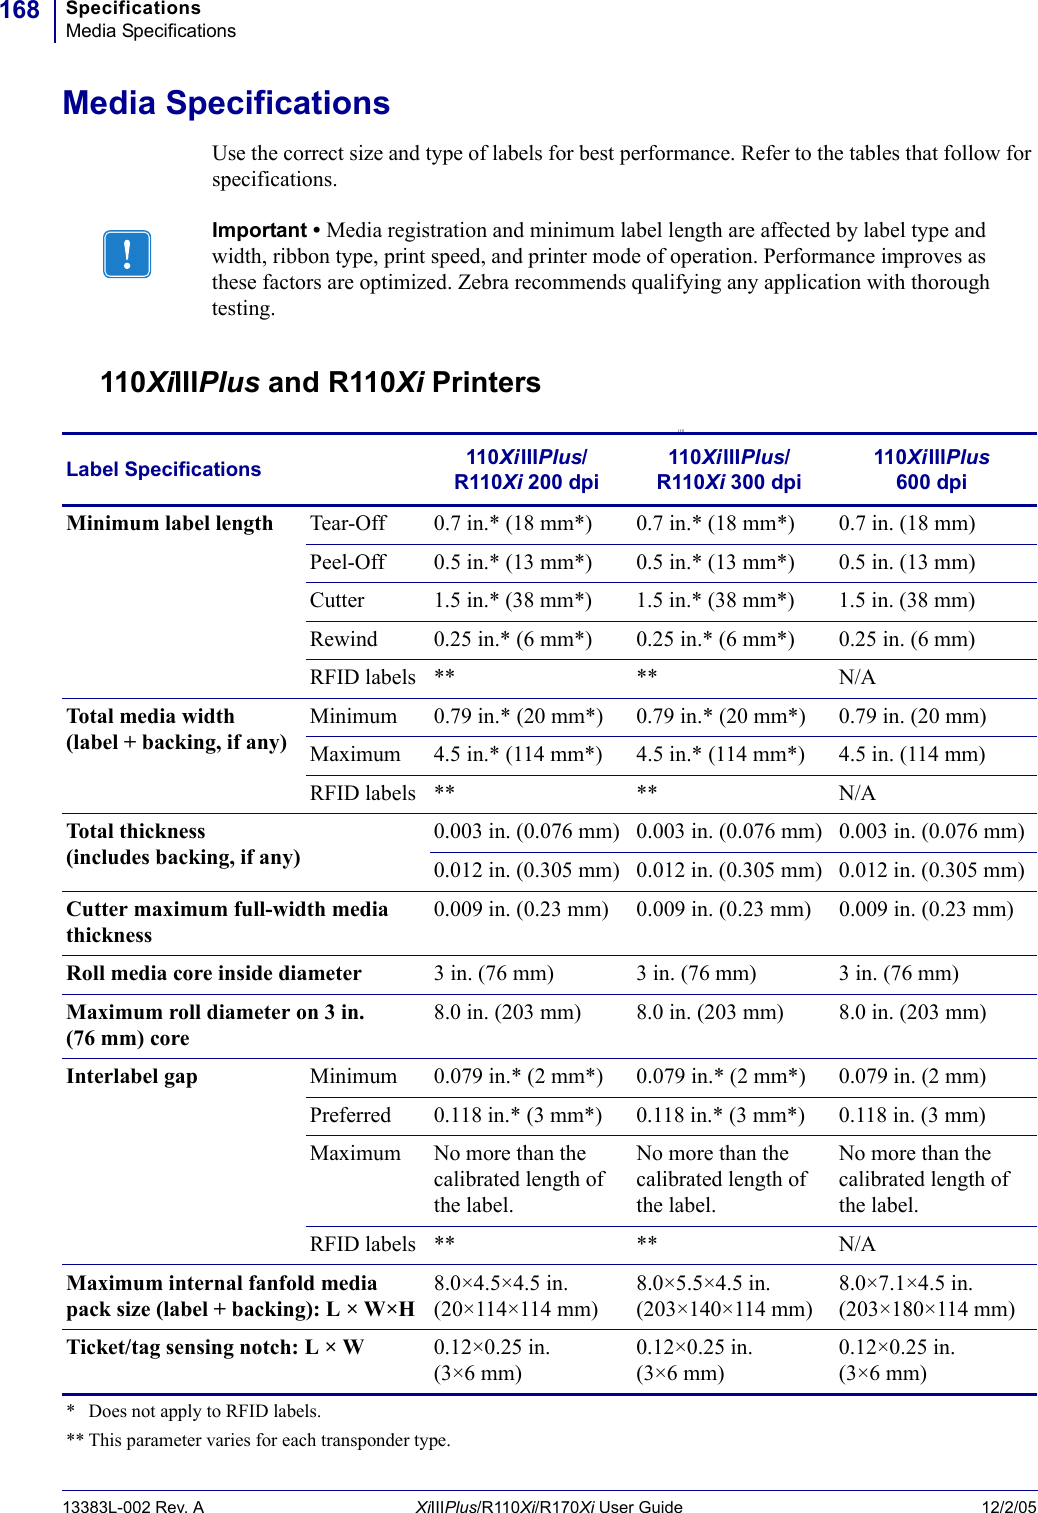 SpecificationsMedia Specifications16813383L-002 Rev. A XiIIIPlus/R110Xi/R170Xi User Guide 12/2/05Media SpecificationsUse the correct size and type of labels for best performance. Refer to the tables that follow for specifications.110XiIIIPlus and R110Xi Printers110Important • Media registration and minimum label length are affected by label type and width, ribbon type, print speed, and printer mode of operation. Performance improves as these factors are optimized. Zebra recommends qualifying any application with thorough testing.Label Specifications 110XiIIIPlus/R110Xi 200 dpi110XiIIIPlus/R110Xi 300 dpi110XiIIIPlus 600 dpiMinimum label length Tear-Off 0.7 in.* (18 mm*) 0.7 in.* (18 mm*) 0.7 in. (18 mm)Peel-Off 0.5 in.* (13 mm*) 0.5 in.* (13 mm*) 0.5 in. (13 mm)Cutter 1.5 in.* (38 mm*) 1.5 in.* (38 mm*) 1.5 in. (38 mm)Rewind 0.25 in.* (6 mm*) 0.25 in.* (6 mm*) 0.25 in. (6 mm)RFID labels ** ** N/ATotal media width (label + backing, if any)Minimum 0.79 in.* (20 mm*) 0.79 in.* (20 mm*) 0.79 in. (20 mm)Maximum 4.5 in.* (114 mm*) 4.5 in.* (114 mm*) 4.5 in. (114 mm)RFID labels ** ** N/ATotal thickness (includes backing, if any)0.003 in. (0.076 mm) 0.003 in. (0.076 mm) 0.003 in. (0.076 mm)0.012 in. (0.305 mm) 0.012 in. (0.305 mm) 0.012 in. (0.305 mm)Cutter maximum full-width media thickness0.009 in. (0.23 mm) 0.009 in. (0.23 mm) 0.009 in. (0.23 mm)Roll media core inside diameter 3 in. (76 mm) 3 in. (76 mm) 3 in. (76 mm)Maximum roll diameter on 3 in. (76 mm) core8.0 in. (203 mm) 8.0 in. (203 mm) 8.0 in. (203 mm)Interlabel gap Minimum 0.079 in.* (2 mm*) 0.079 in.* (2 mm*) 0.079 in. (2 mm)Preferred 0.118 in.* (3 mm*) 0.118 in.* (3 mm*) 0.118 in. (3 mm)Maximum No more than the calibrated length of the label.No more than the calibrated length of the label.No more than the calibrated length of the label.RFID labels ** ** N/AMaximum internal fanfold media pack size (label + backing): L × W×H8.0×4.5×4.5 in. (20×114×114 mm)8.0×5.5×4.5 in.(203×140×114 mm)8.0×7.1×4.5 in.(203×180×114 mm)Ticket/tag sensing notch: L × W 0.12×0.25 in. (3×6 mm)0.12×0.25 in. (3×6 mm)0.12×0.25 in. (3×6 mm)*  Does not apply to RFID labels.** This parameter varies for each transponder type.